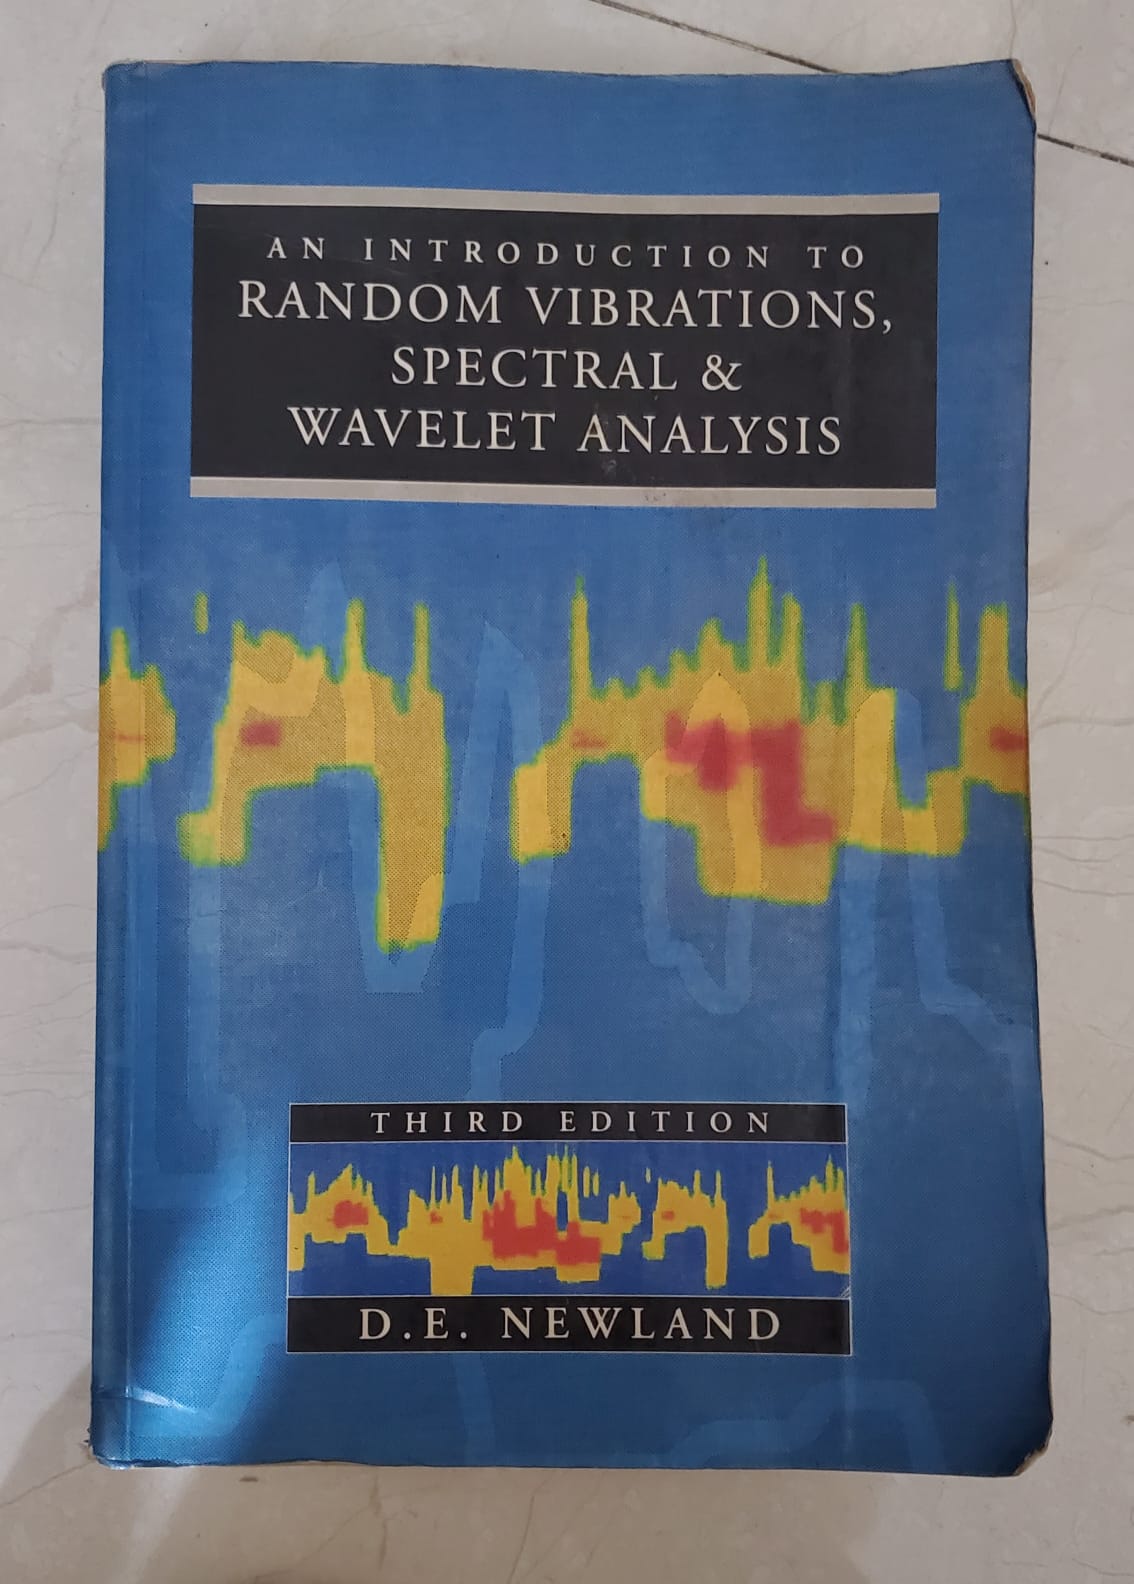 an introduction to random vibrations, spectral and wavelet analysis